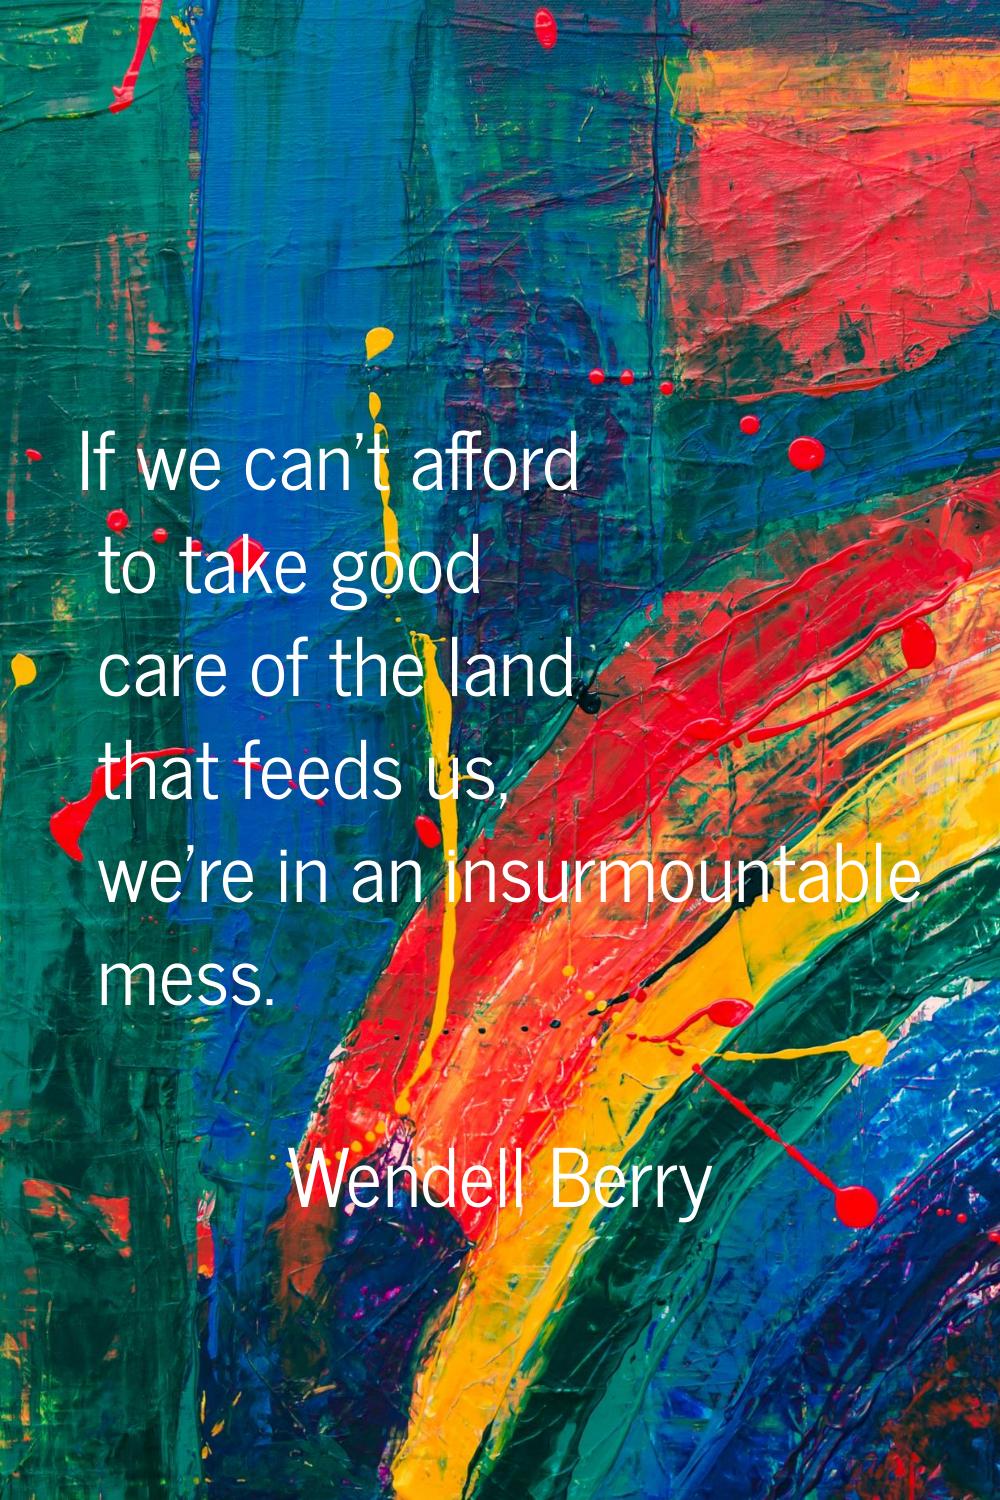 If we can't afford to take good care of the land that feeds us, we're in an insurmountable mess.